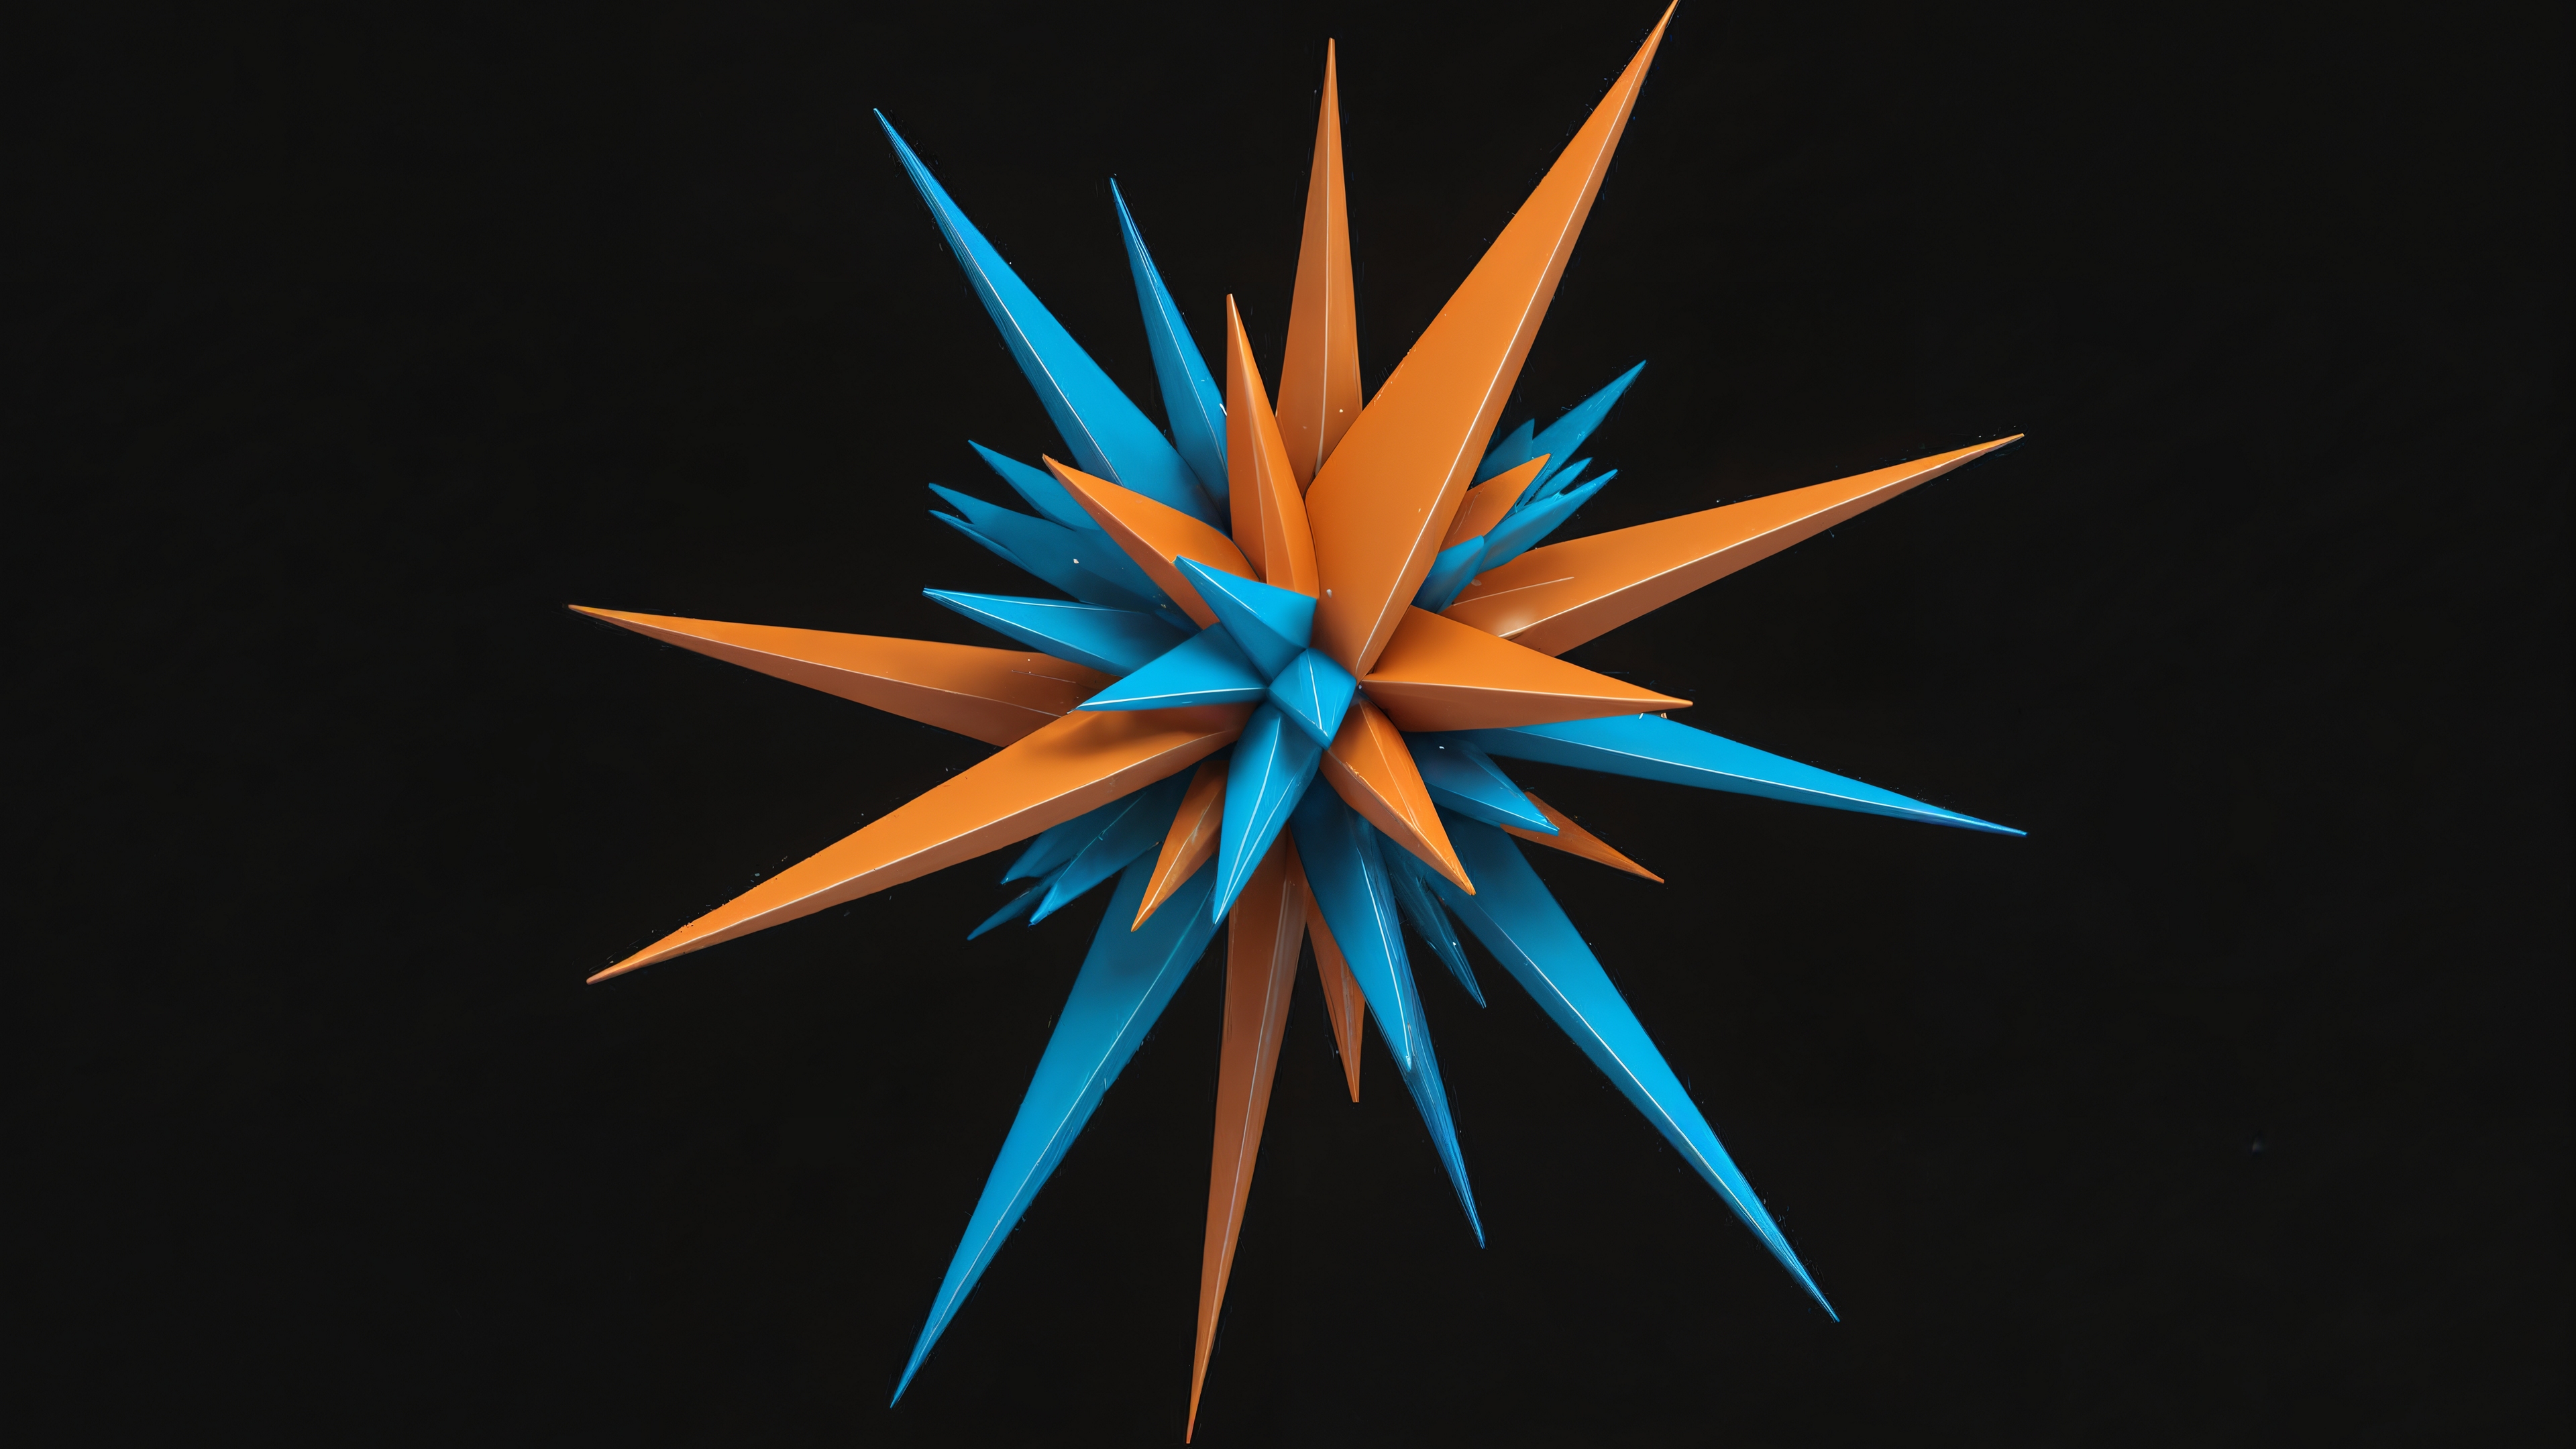 Vibrating triangles in orange and blue